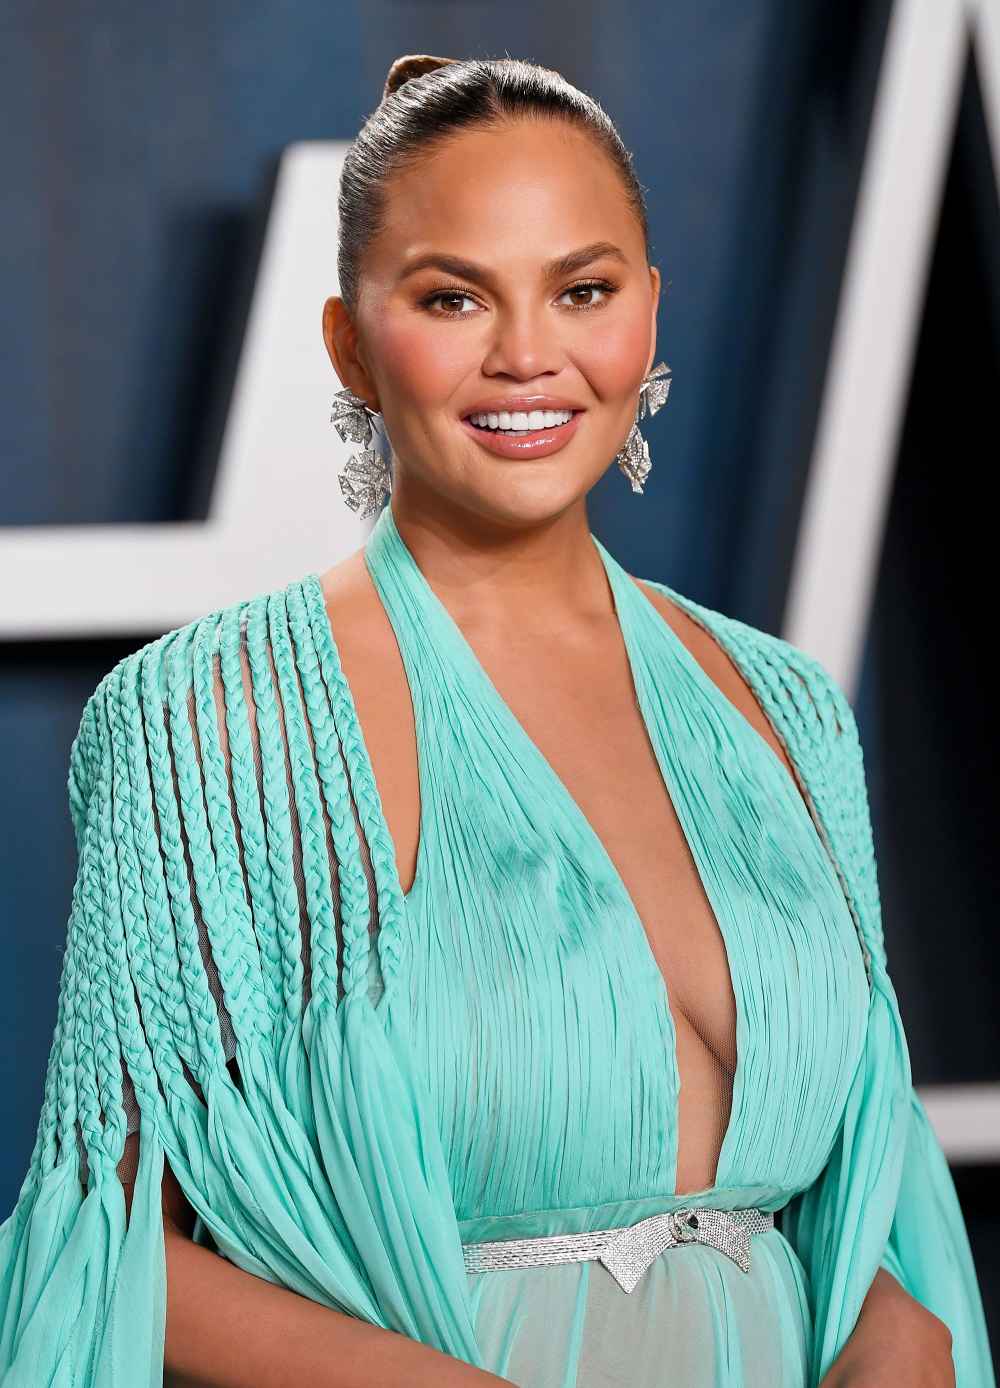 Chrissy Teigen 3rd Cookbook Will Have Clean Delicious Recipes